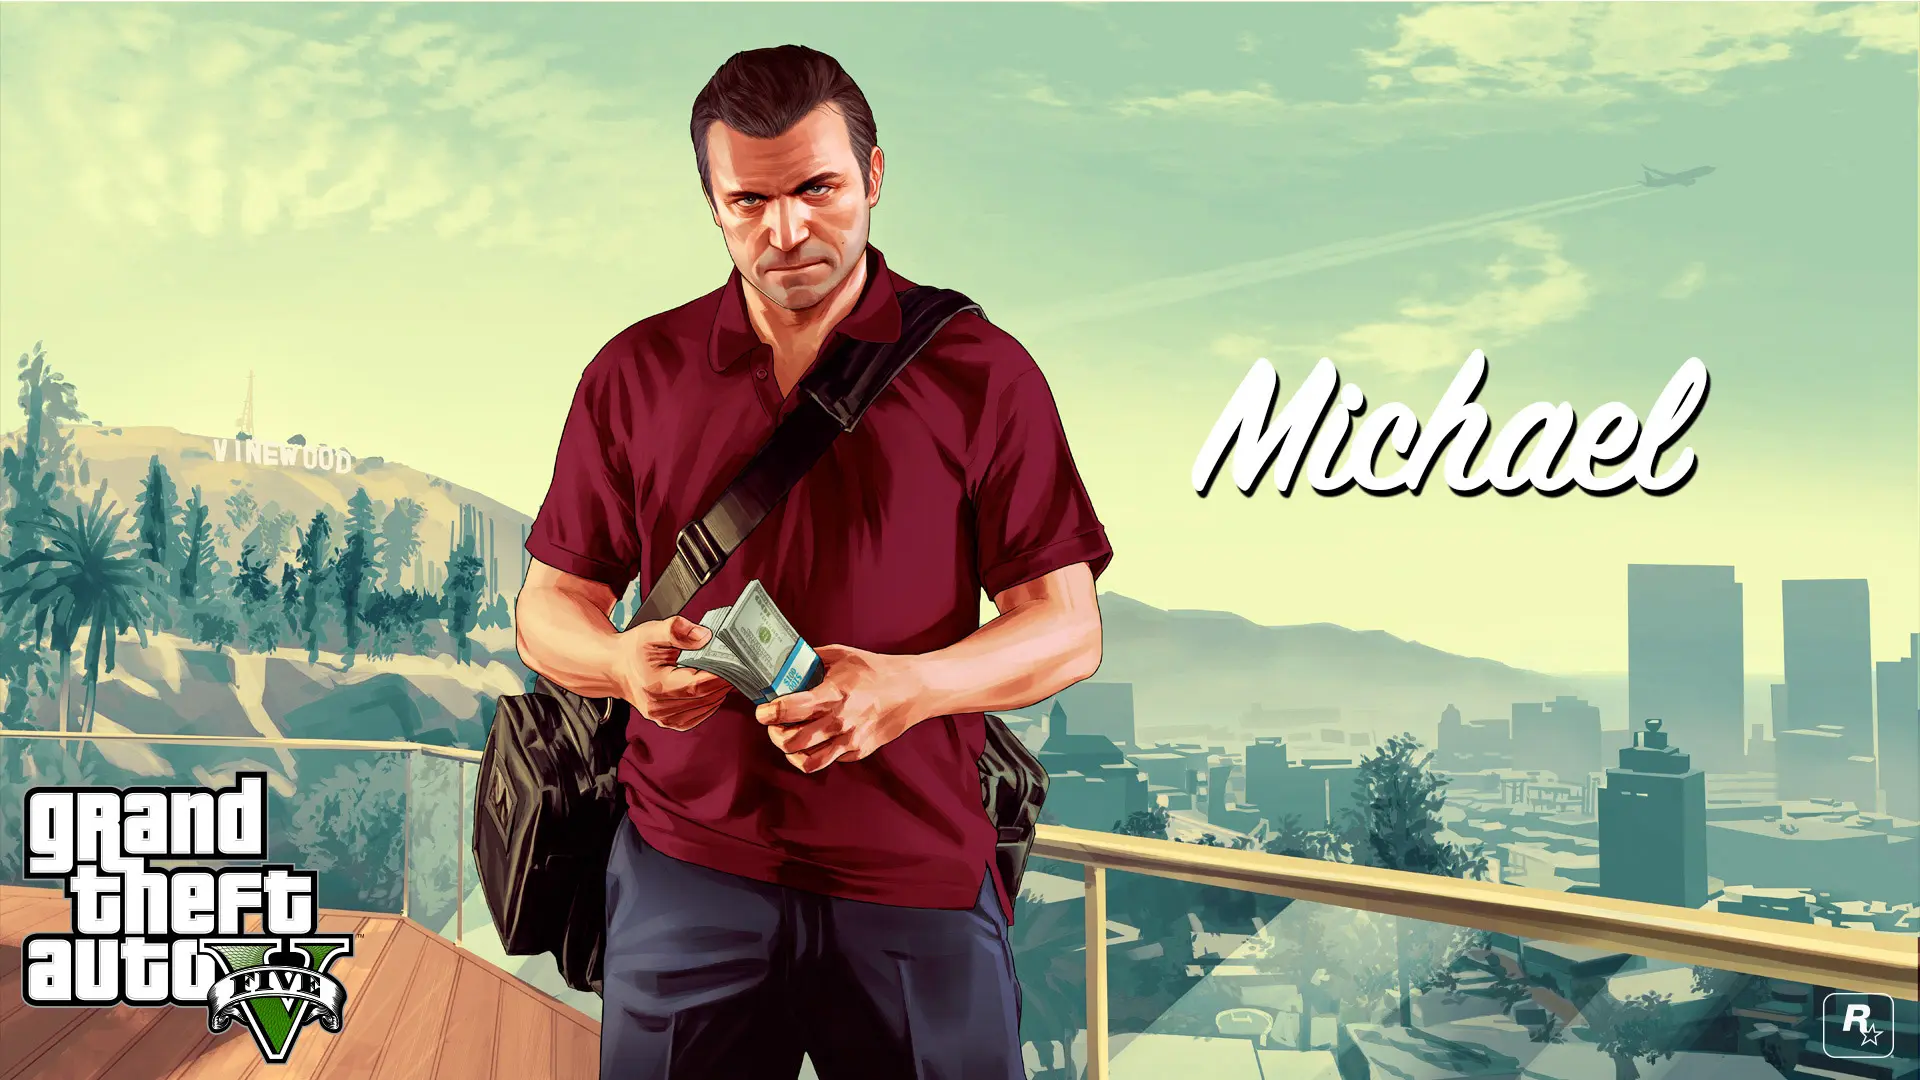 Game Grand Theft Auto 5 wallpaper 31 | Background Image